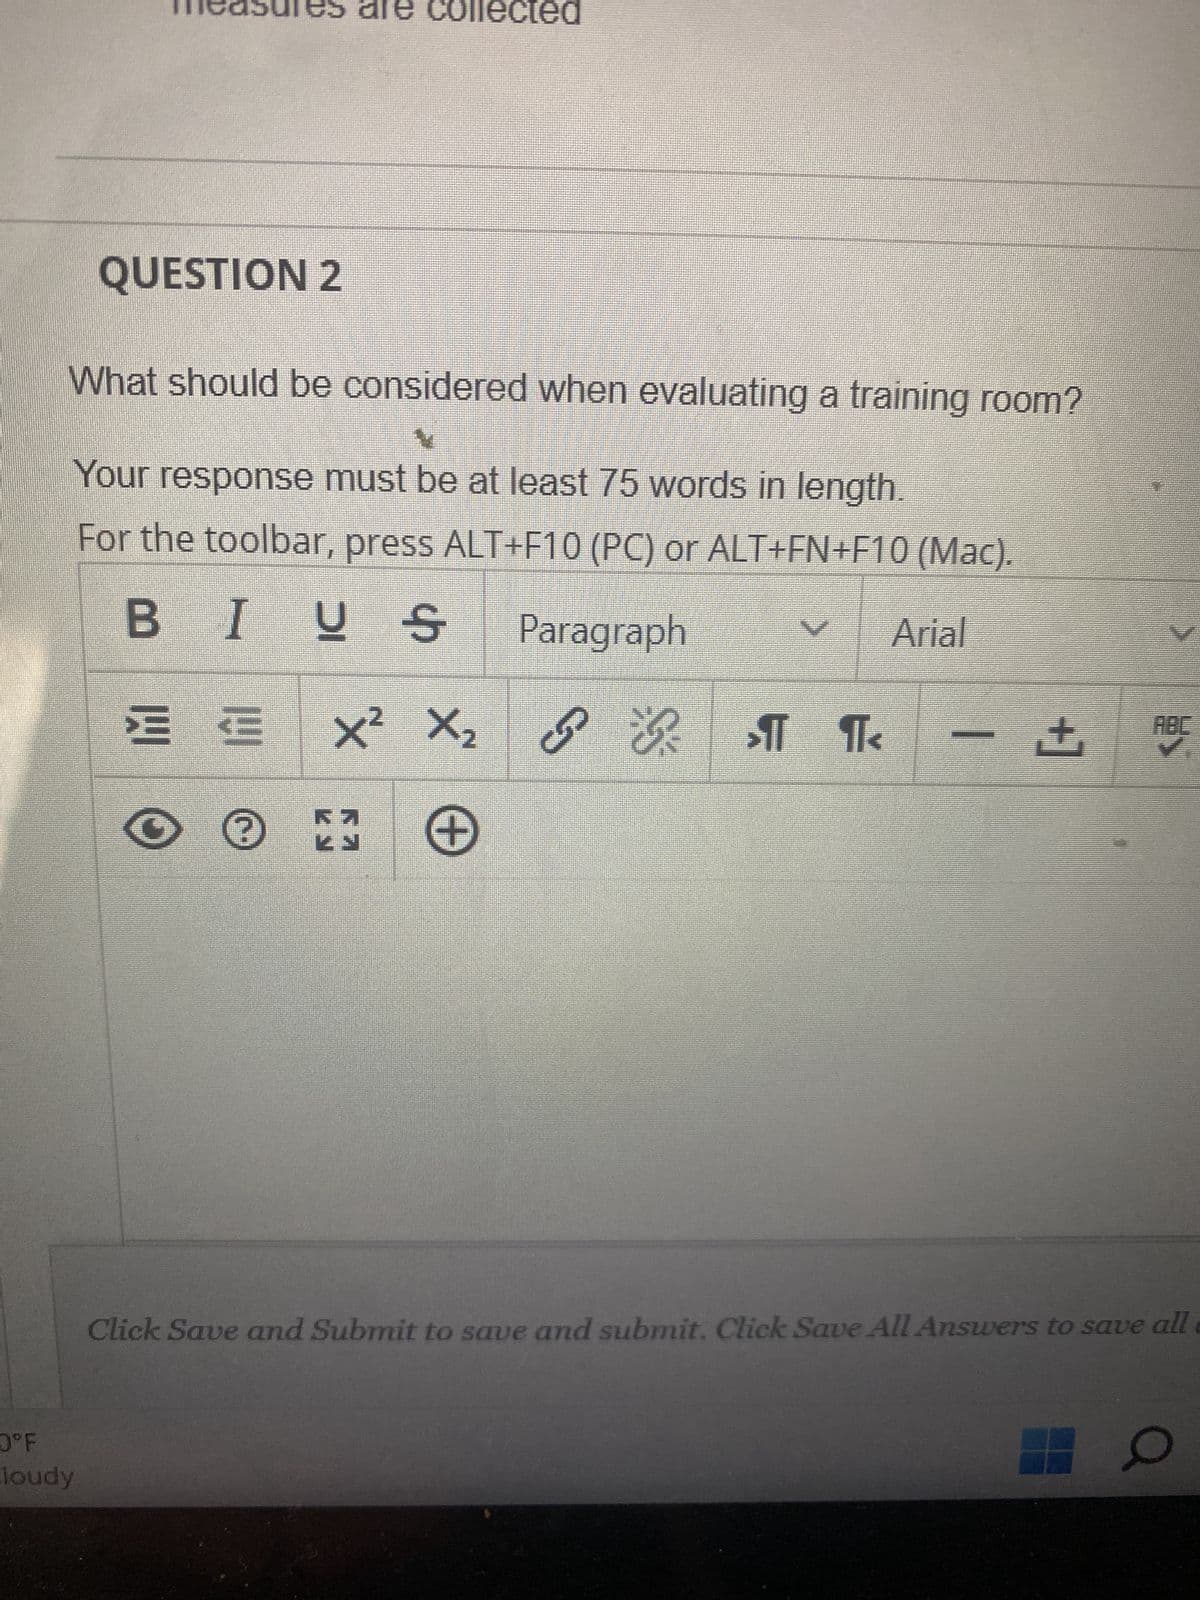 QUESTION 2
0°F
loudy
What should be considered when evaluating a training room?
4
Your response must be at least 75 words in length.
For the toolbar, press ALT+F10 (PC) or ALT+FN+F10 (Mac).
BIUS Paragraph
Arial
collected
트트 X² X₂
+
OⓇ
Ra
S
PR ST
>11 ¶<
+
Click Save and Submit to save and submit. Click Save All Answers to save all
O